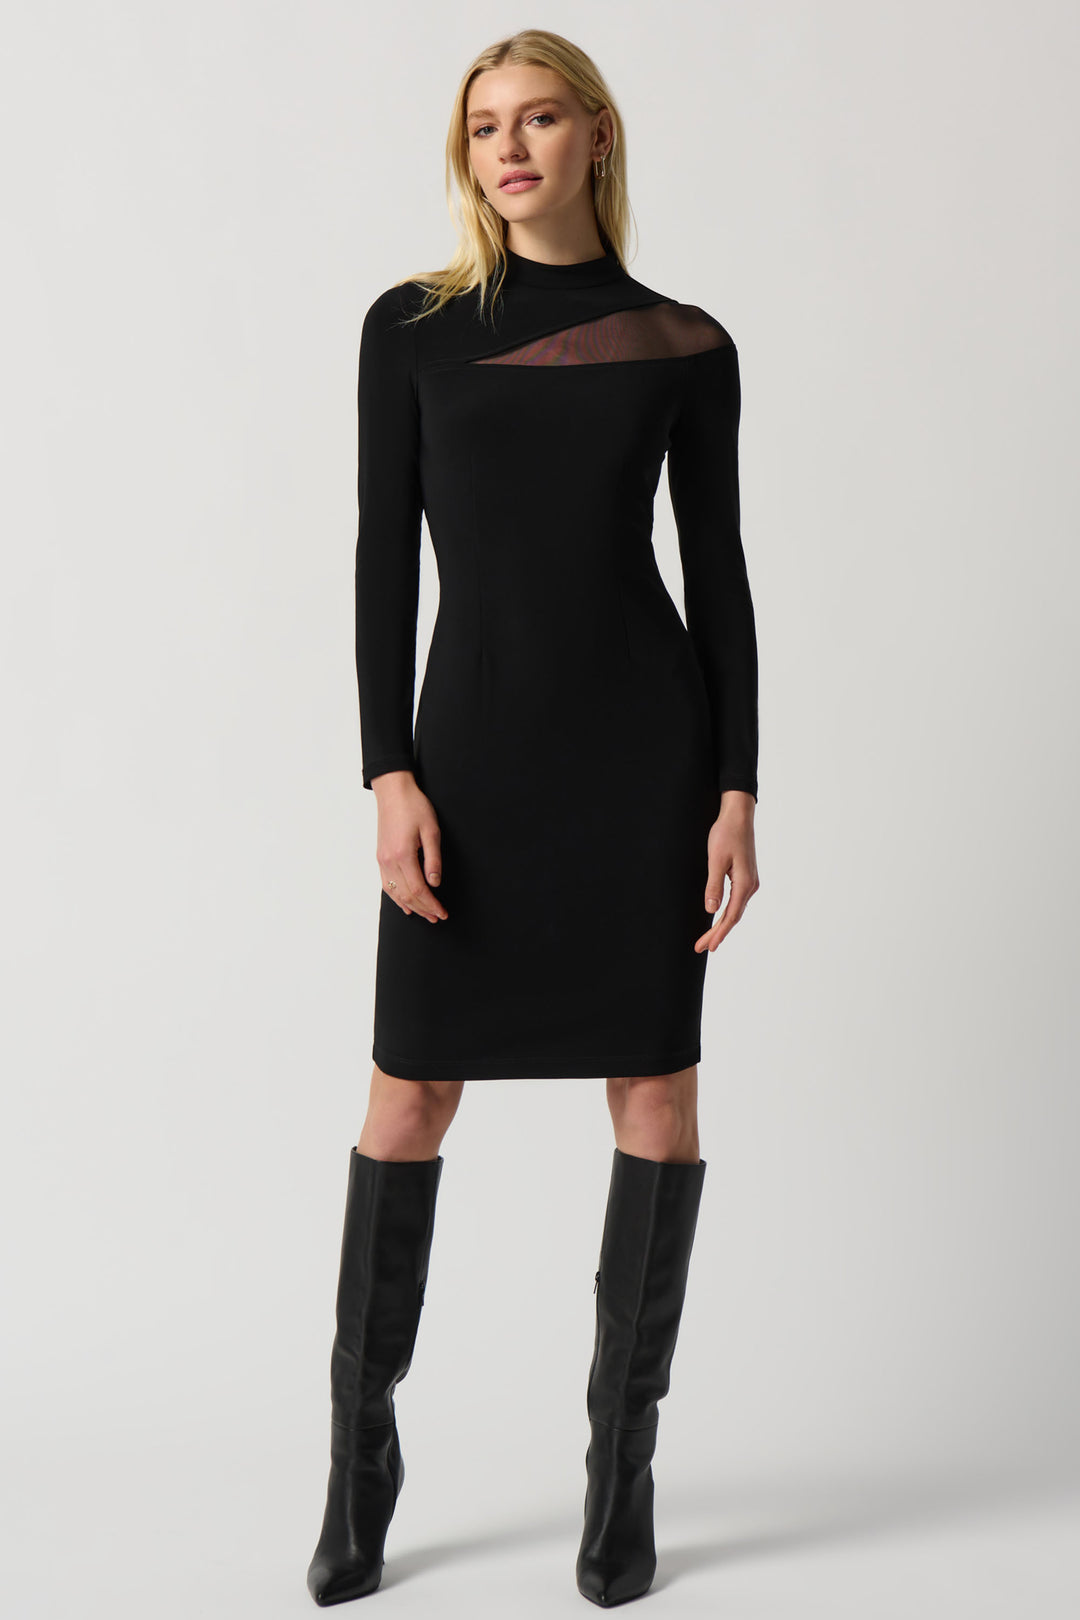 This flattering dress hugs your body in all the right places and features a high neckline for a bold and fancy look. With its thick-knit, stretchy blend, you can take on any event with confidence! 